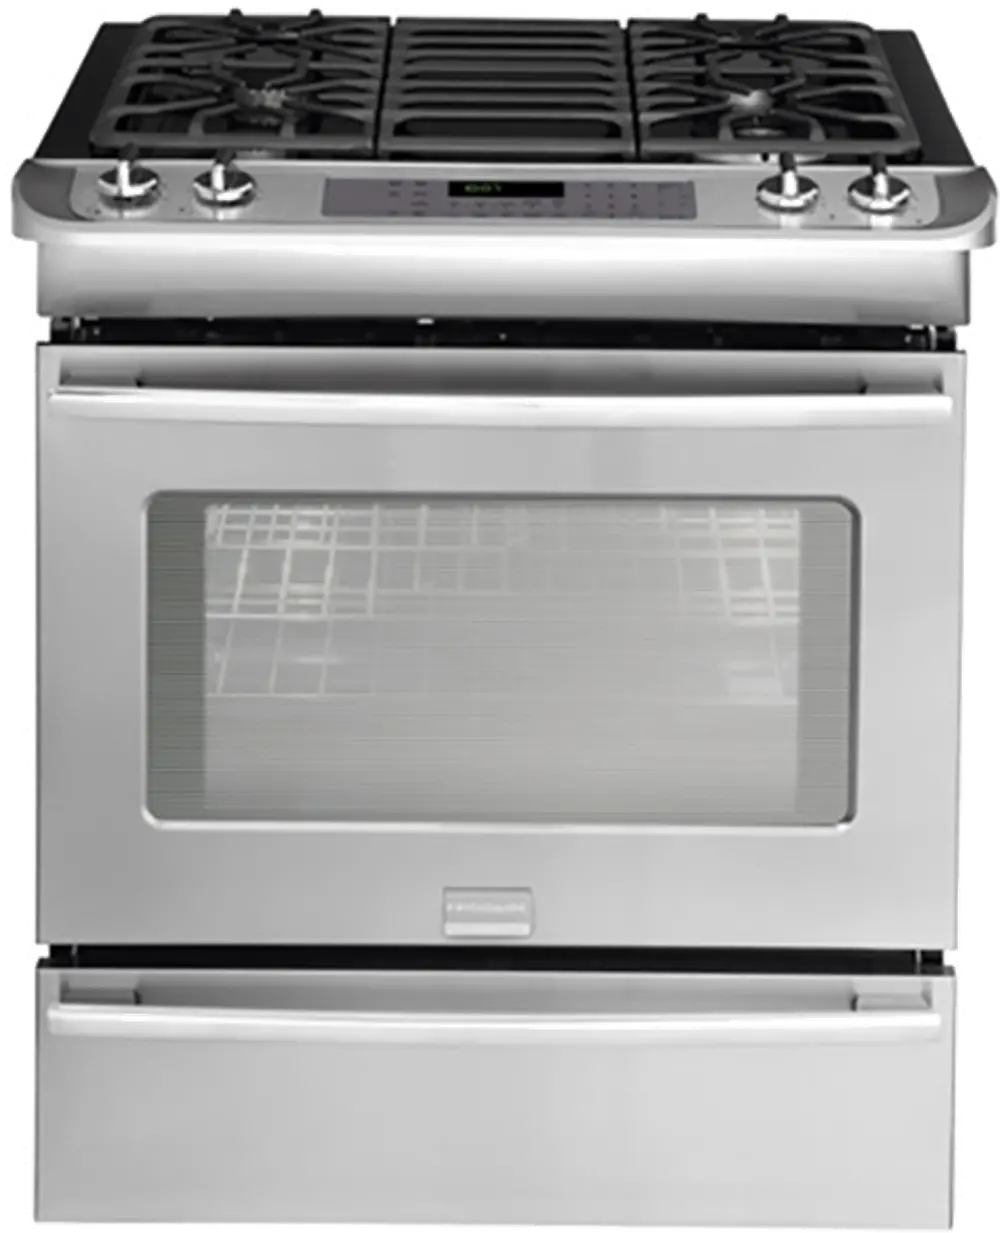 FPDS3085PF Frigidaire 30 Inch Smudge Proof Stainless Steel 4.2 Cu. Ft. Dual Fuel Slide-in Range-1